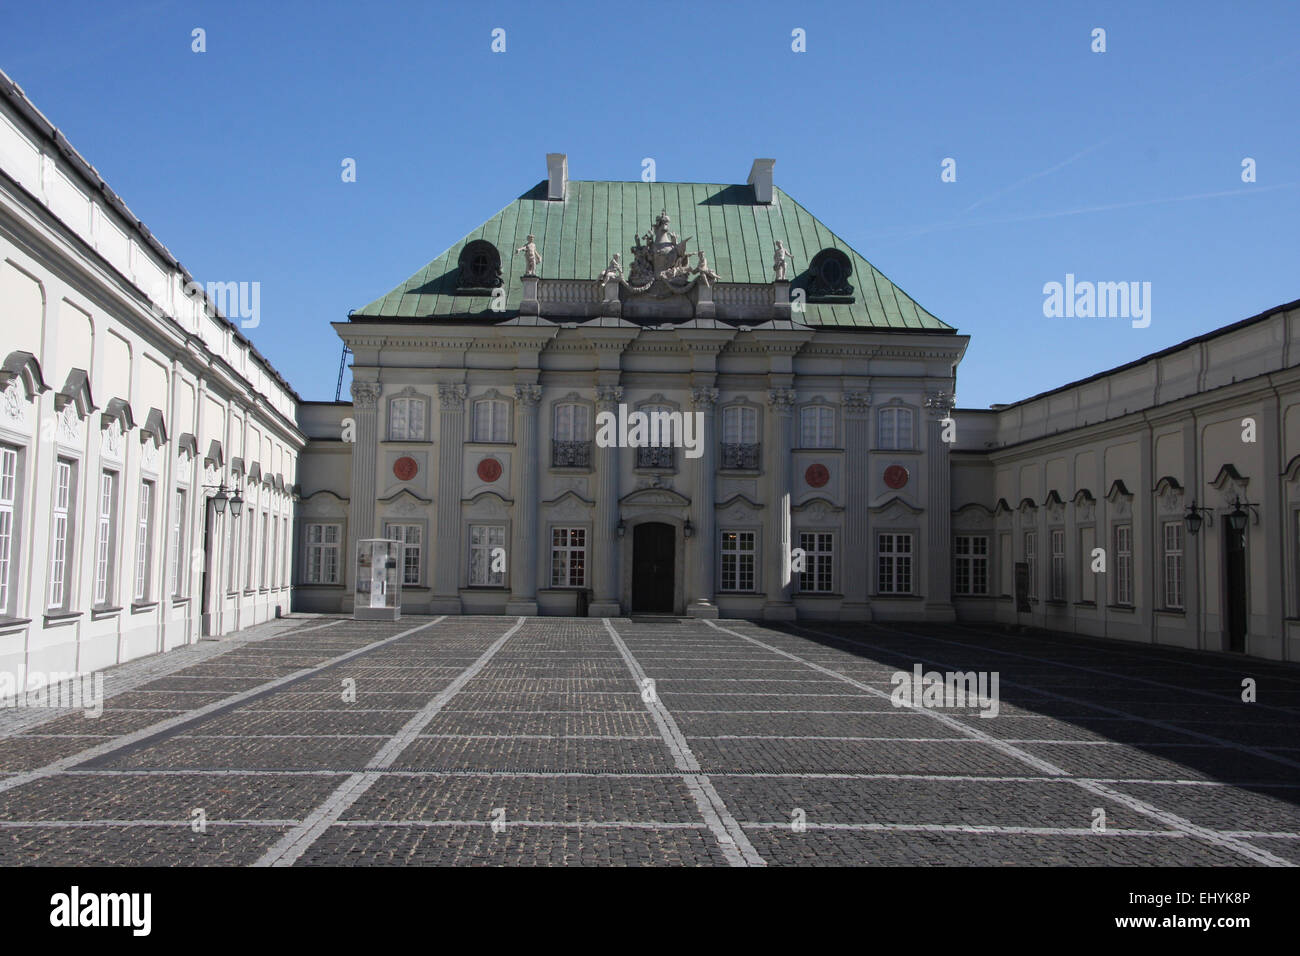 Poland, Warsaw, Europe, palace, copper roof, baroque, Blache, copper roof palace, Old Town, place, Stock Photo